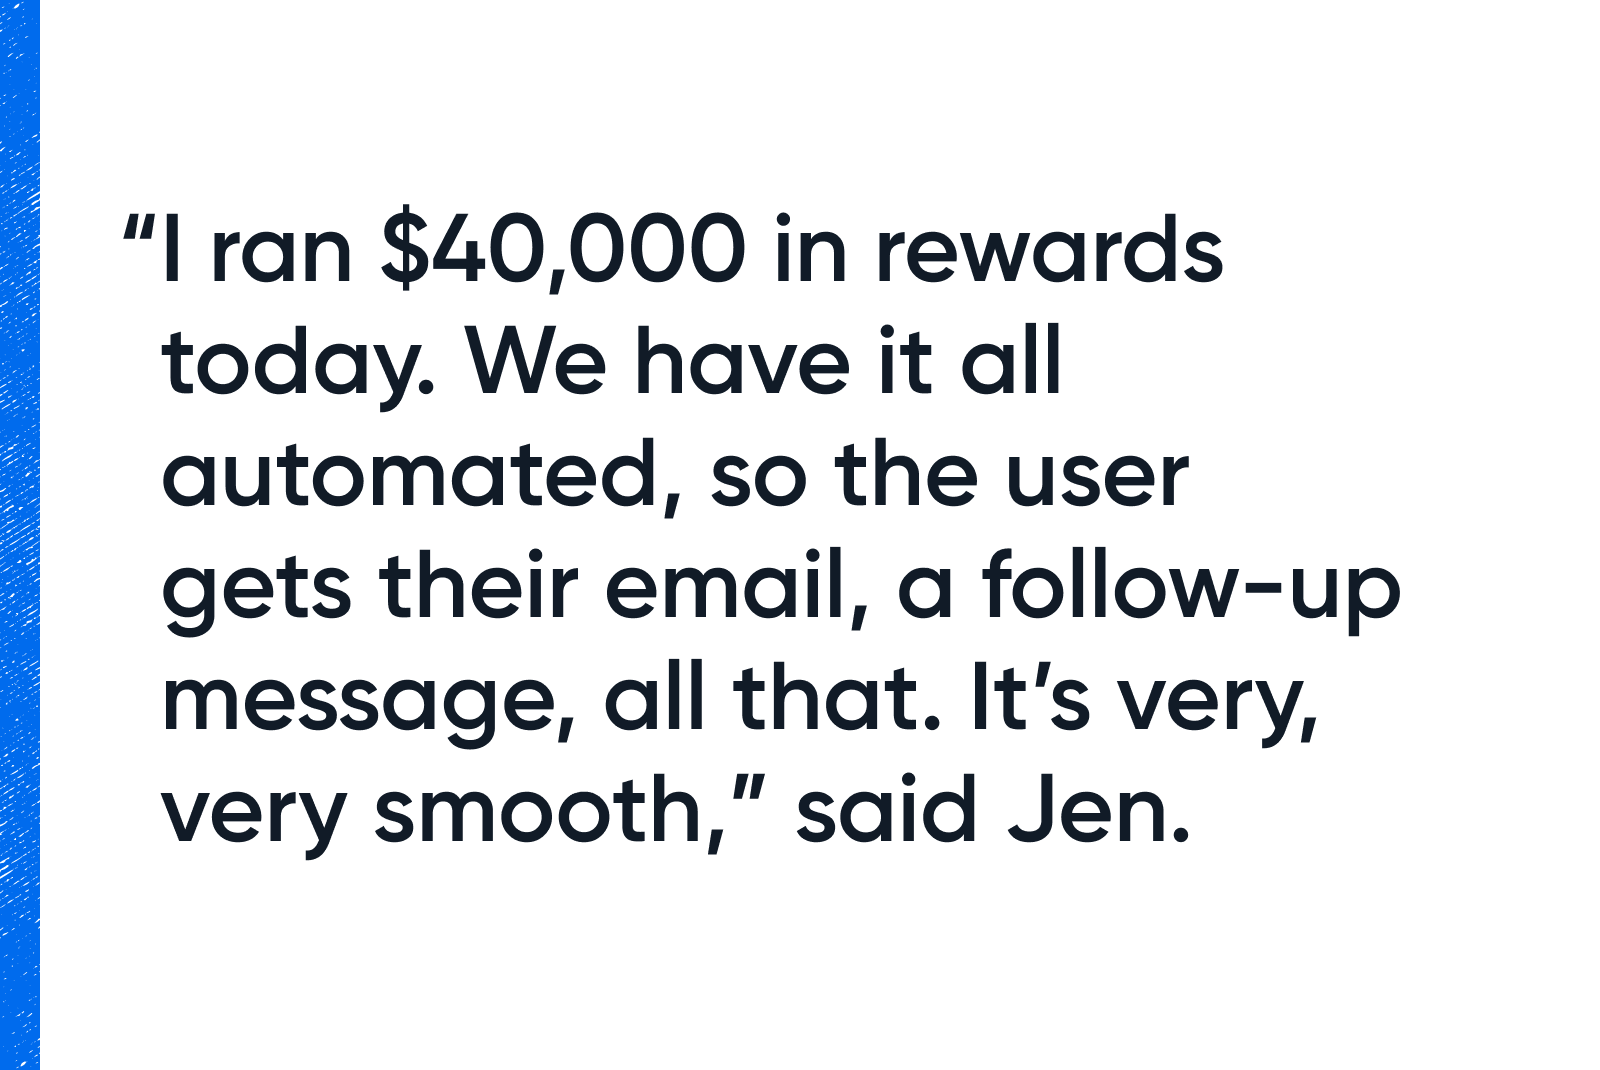 A quote that reads: "I ran $40,000 in rewards today. We have it all automated, so the user gets their email, a follow-up message, all that. It's very, very smooth."